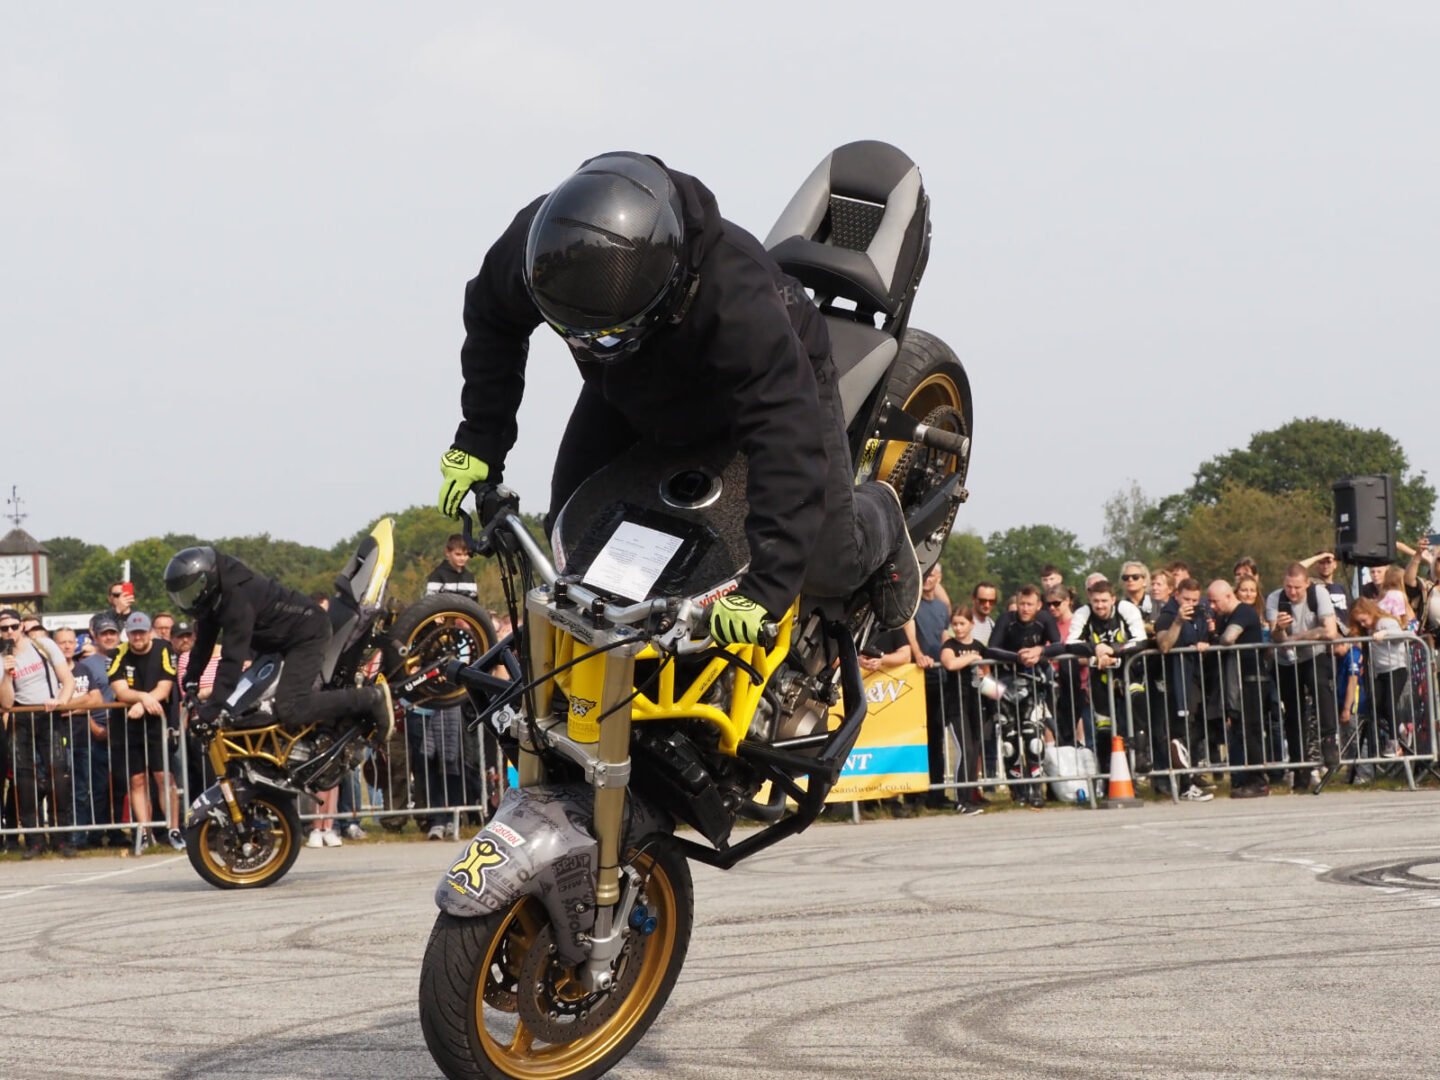 The Scottish Motorcycle Show stunt demonstration with Motorcyclist doing back wheelie